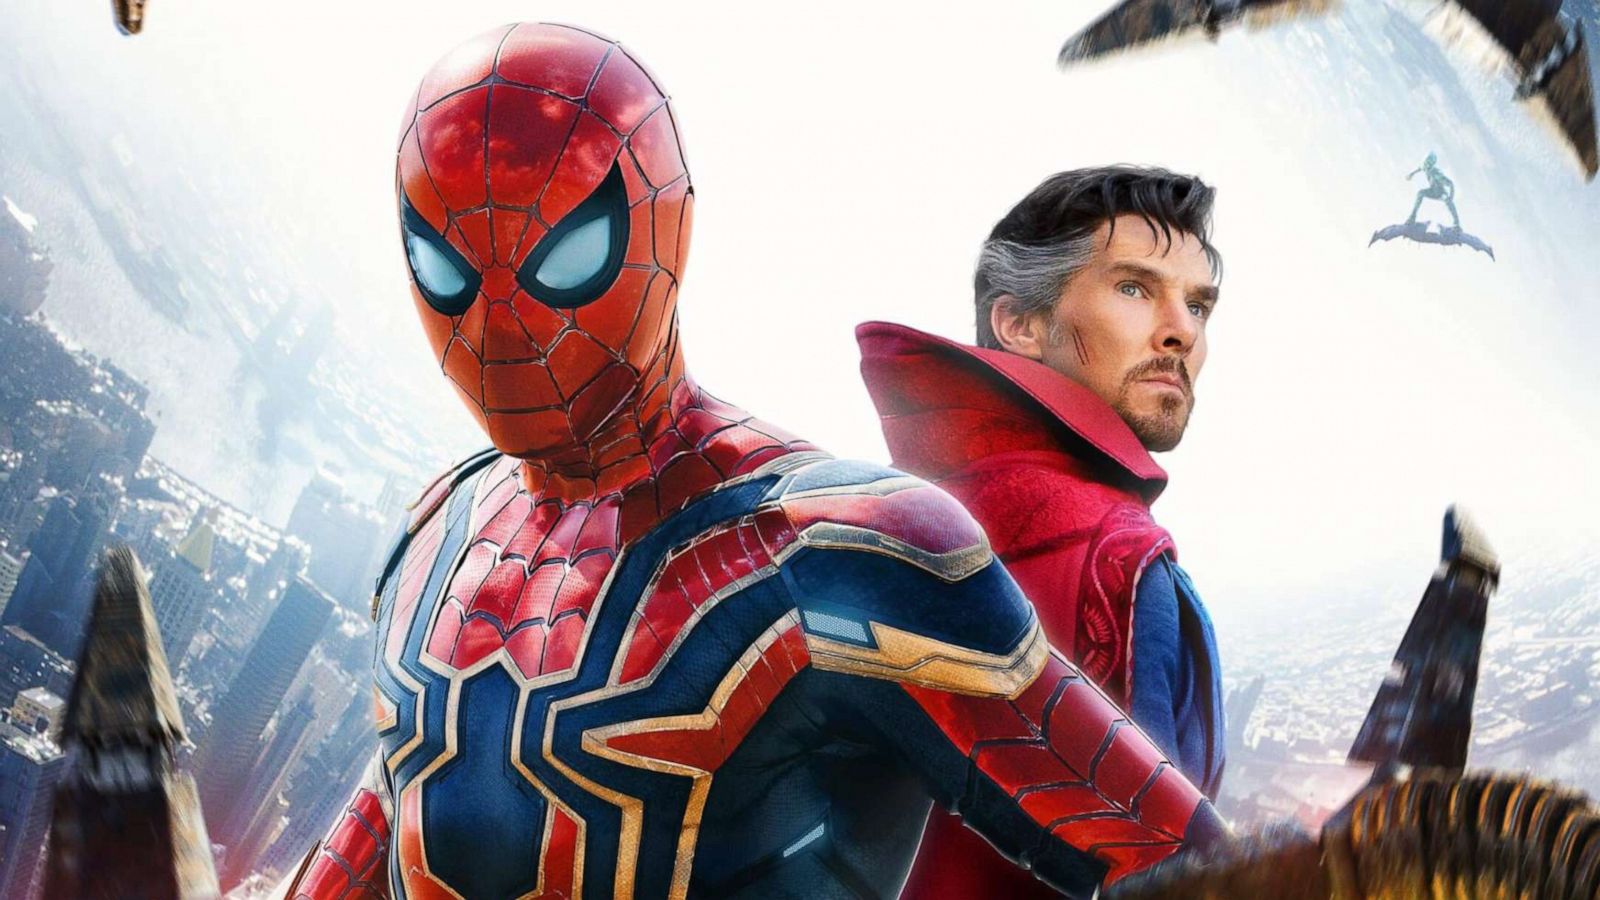 Spider-Man: No Way Home' trailer sees villains from past movies return -  ABC News